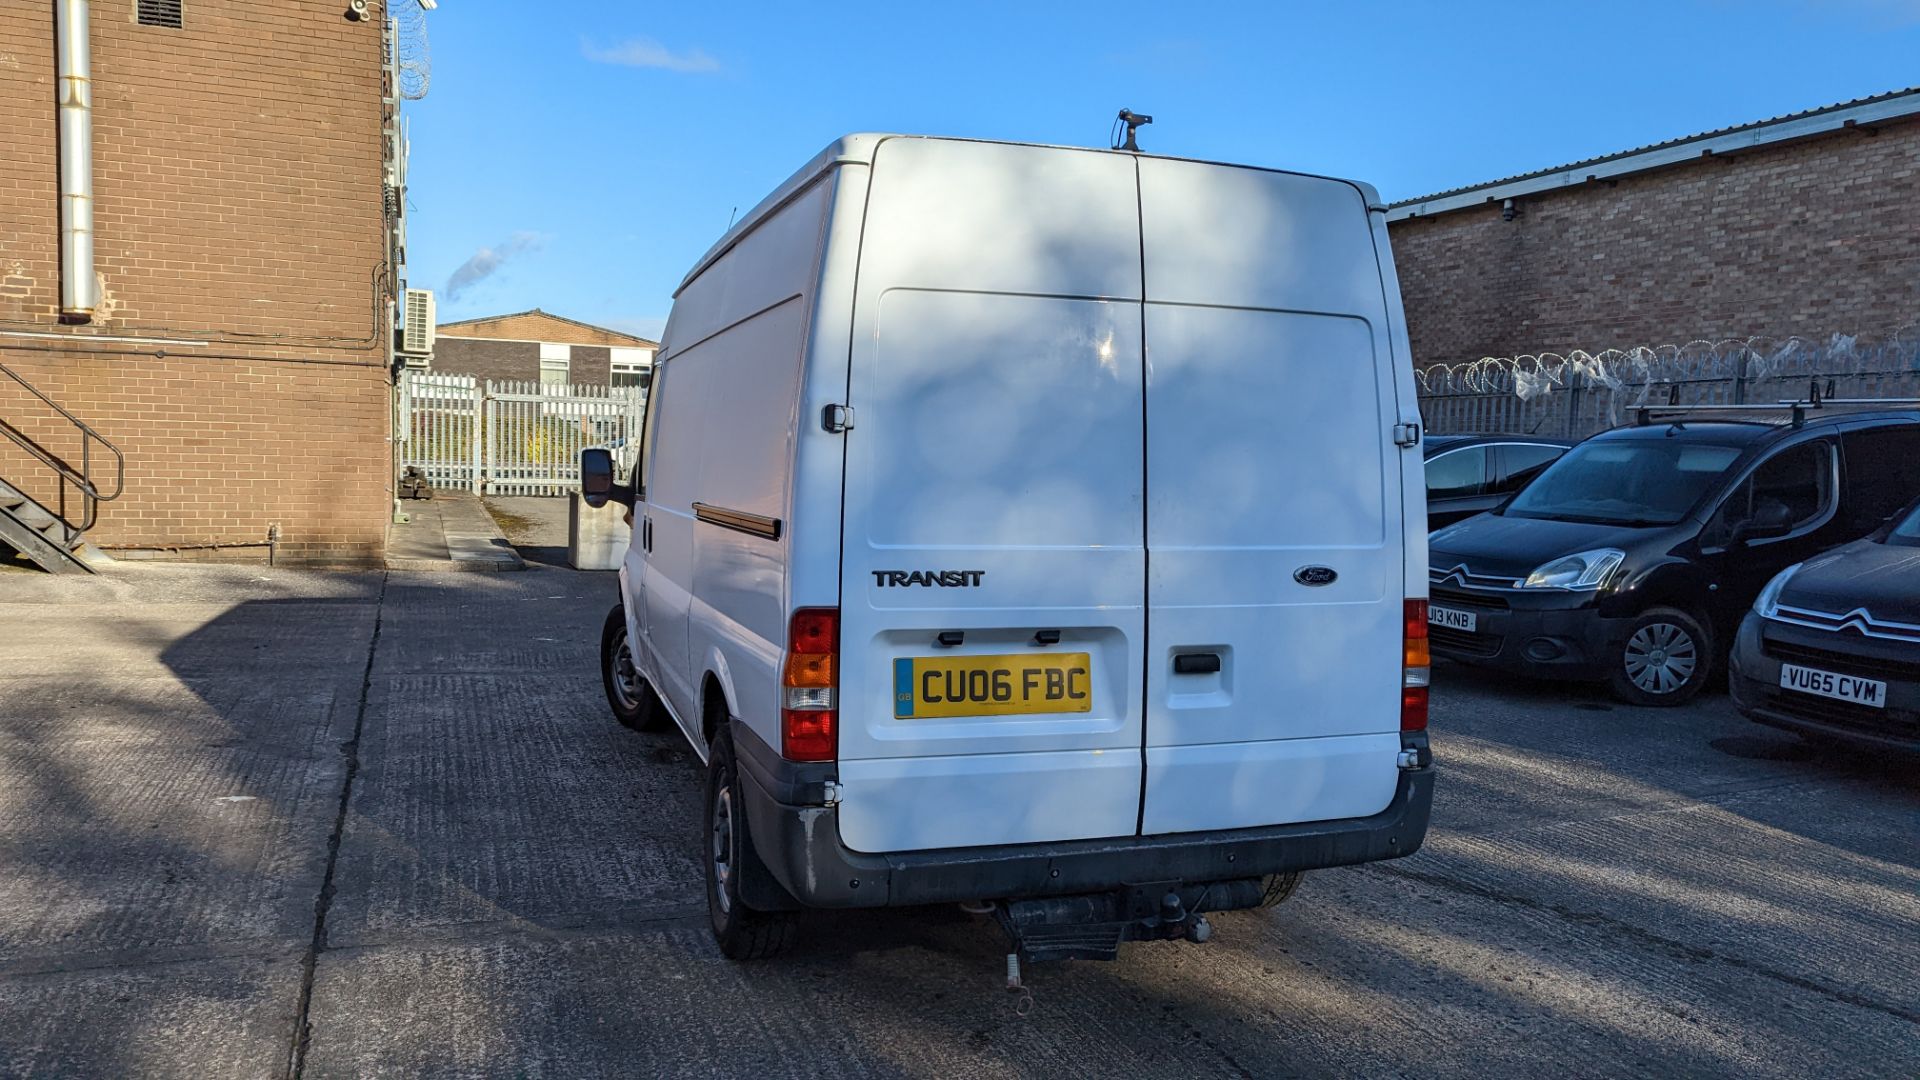 CU06 FBC Ford Transit panel van, 6 speed manual gearbox, 2402cc diesel engine. Colour: white. Fir - Image 13 of 44